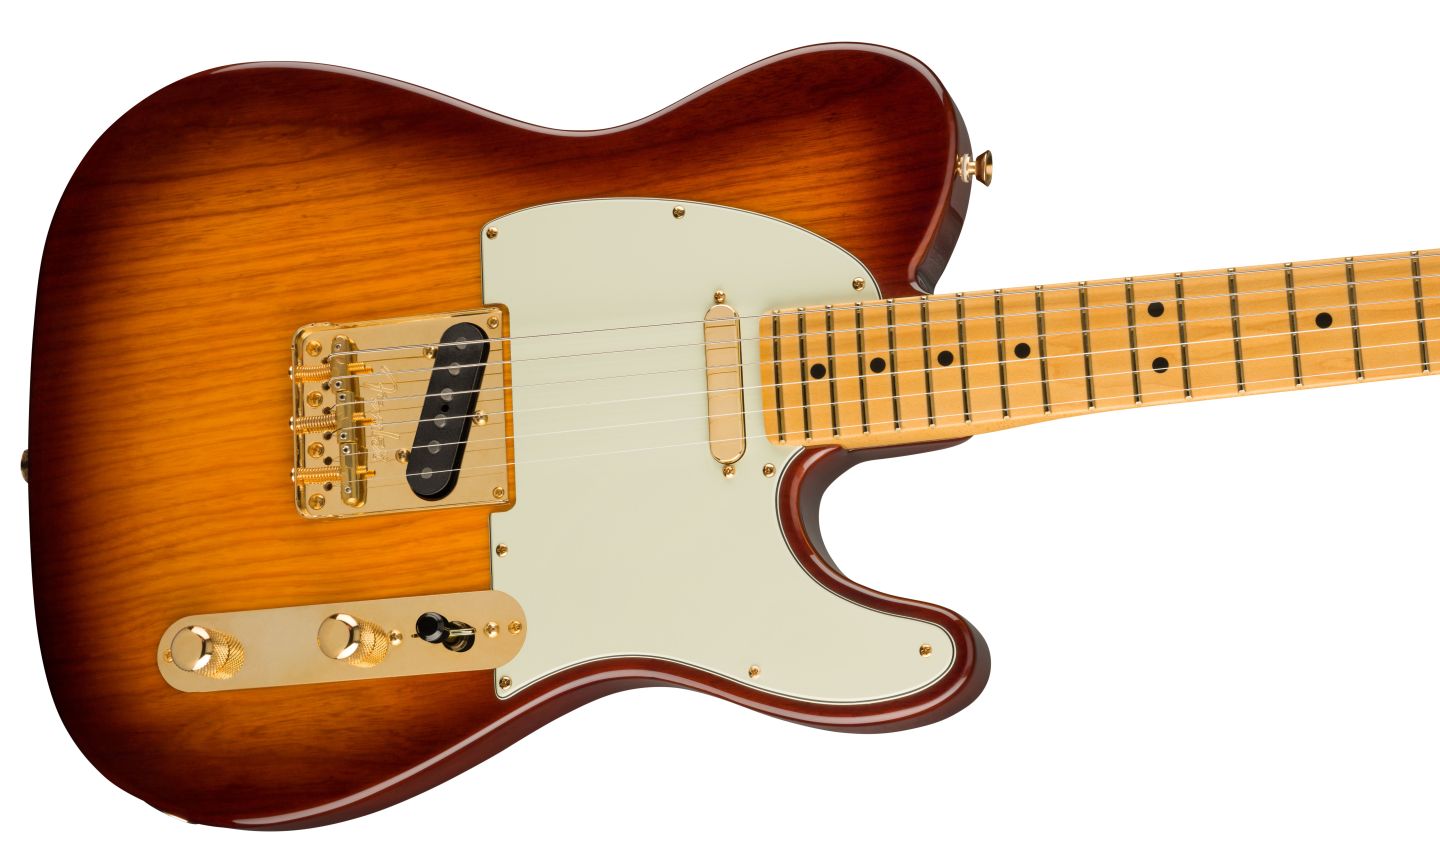 The Platinum edition Telecaster's Twisted Tele pickups deliver searing twang tones